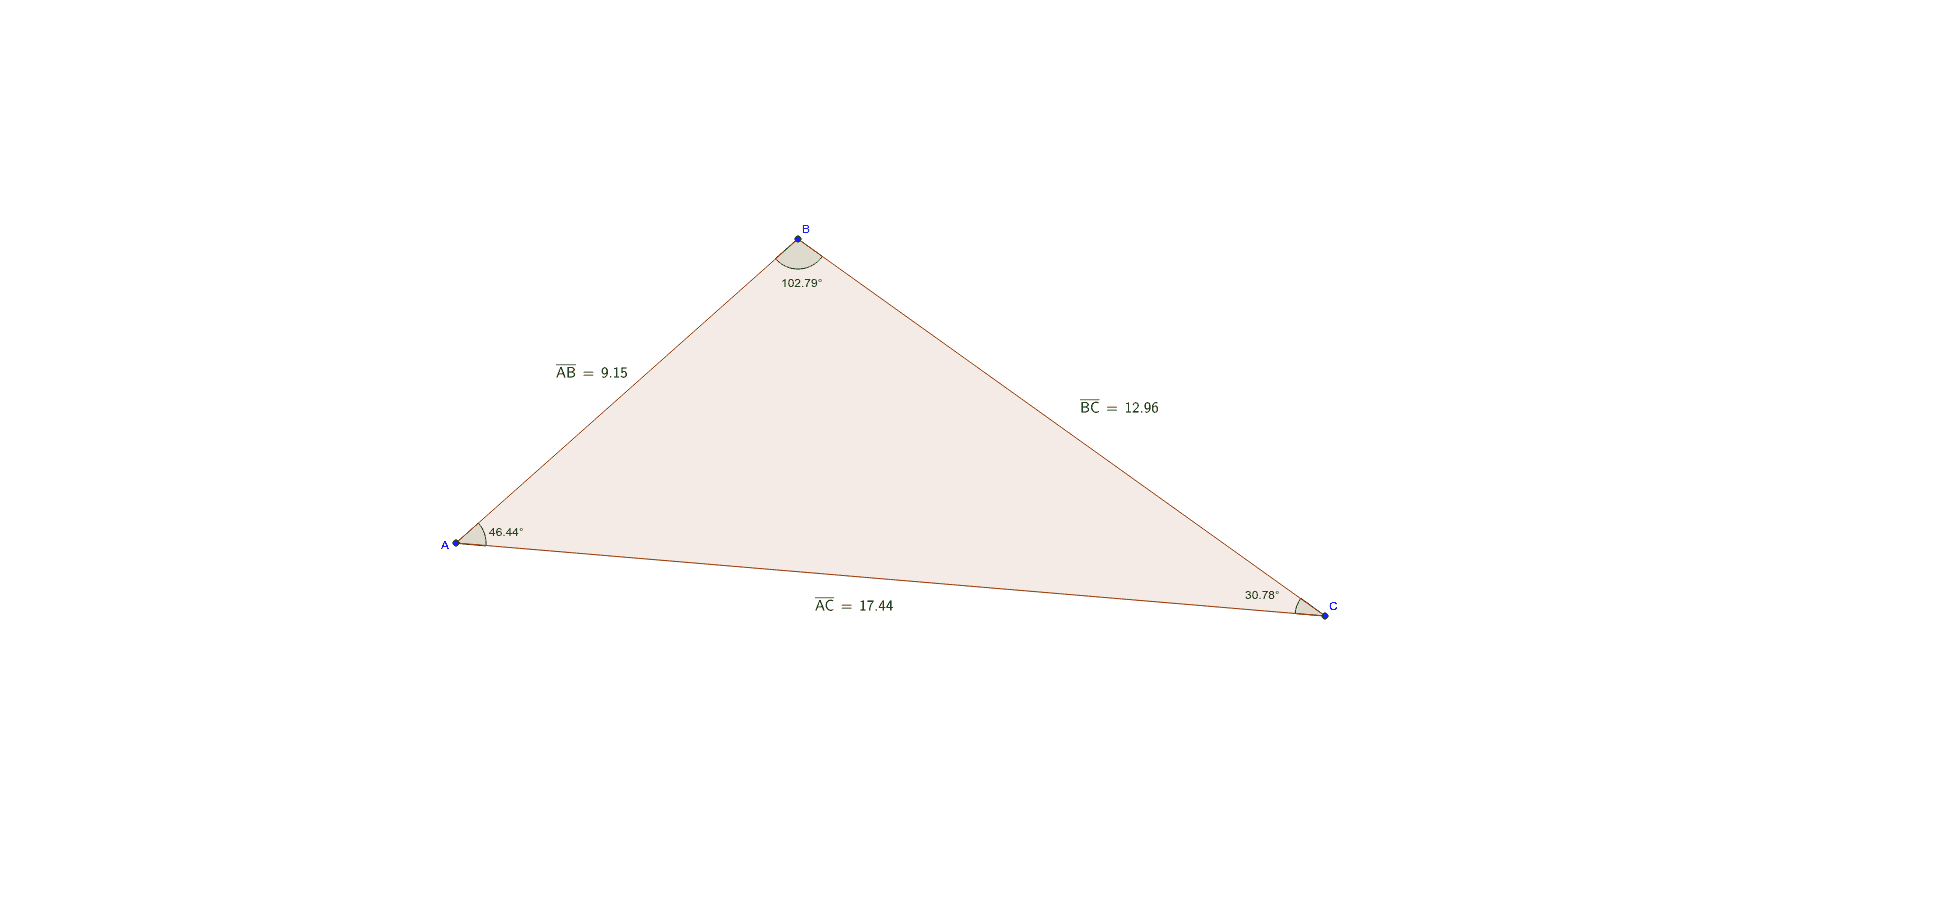 Angles in a Right Angle – GeoGebra